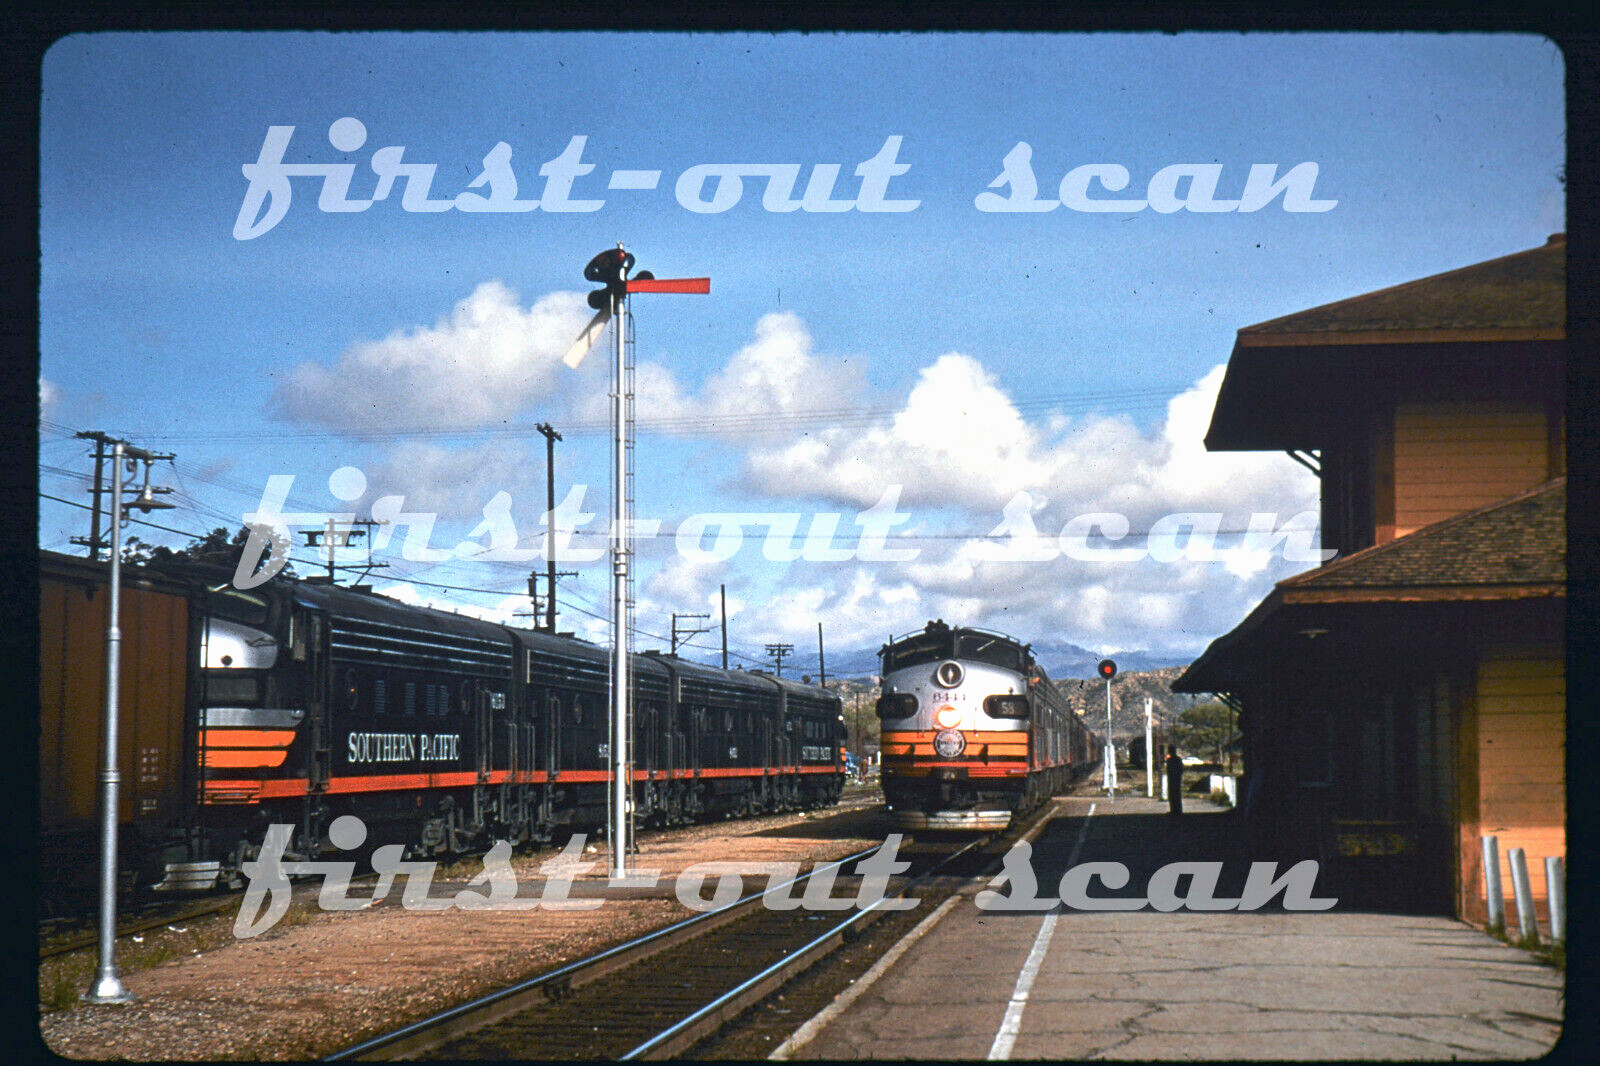 R DUPLICATE SLIDE - Southern Pacific SP 6444 OWL Action at Saugus CA 1954